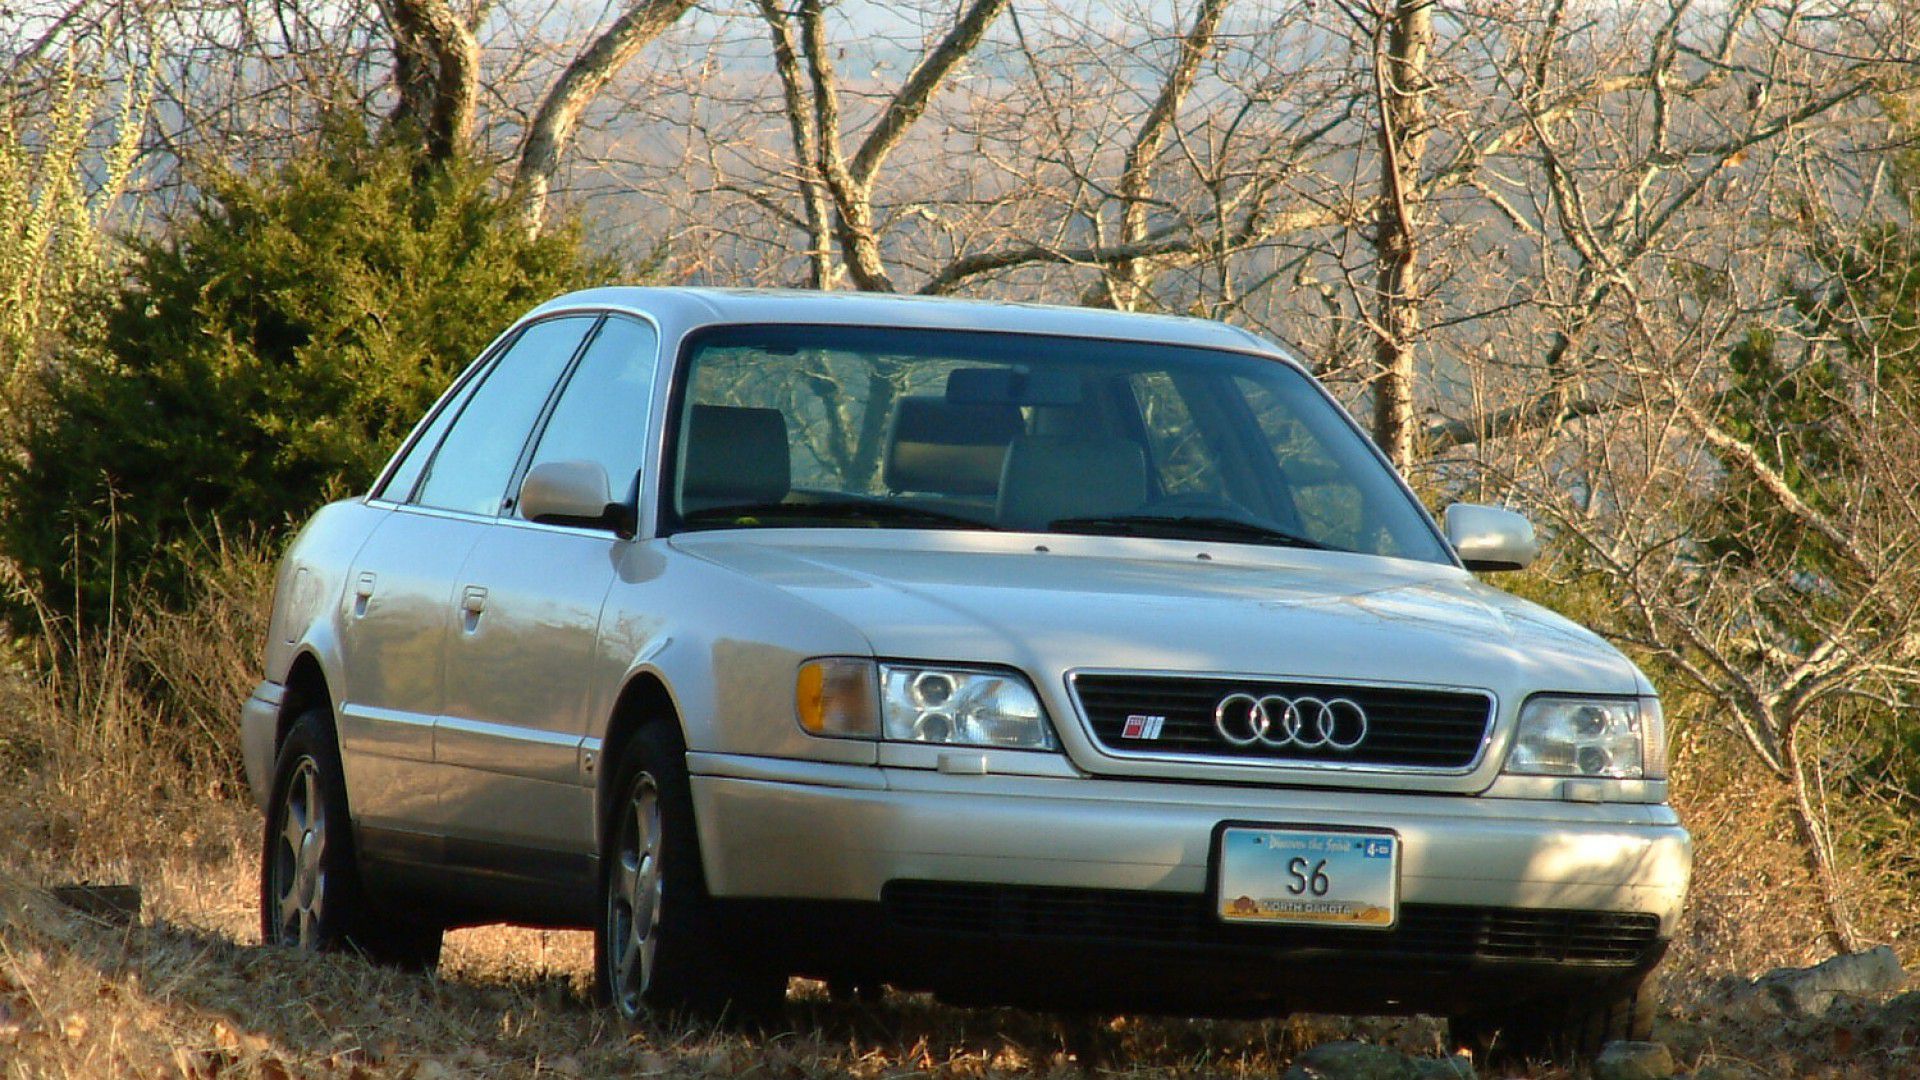 Audi A8 (1994 to 2003)